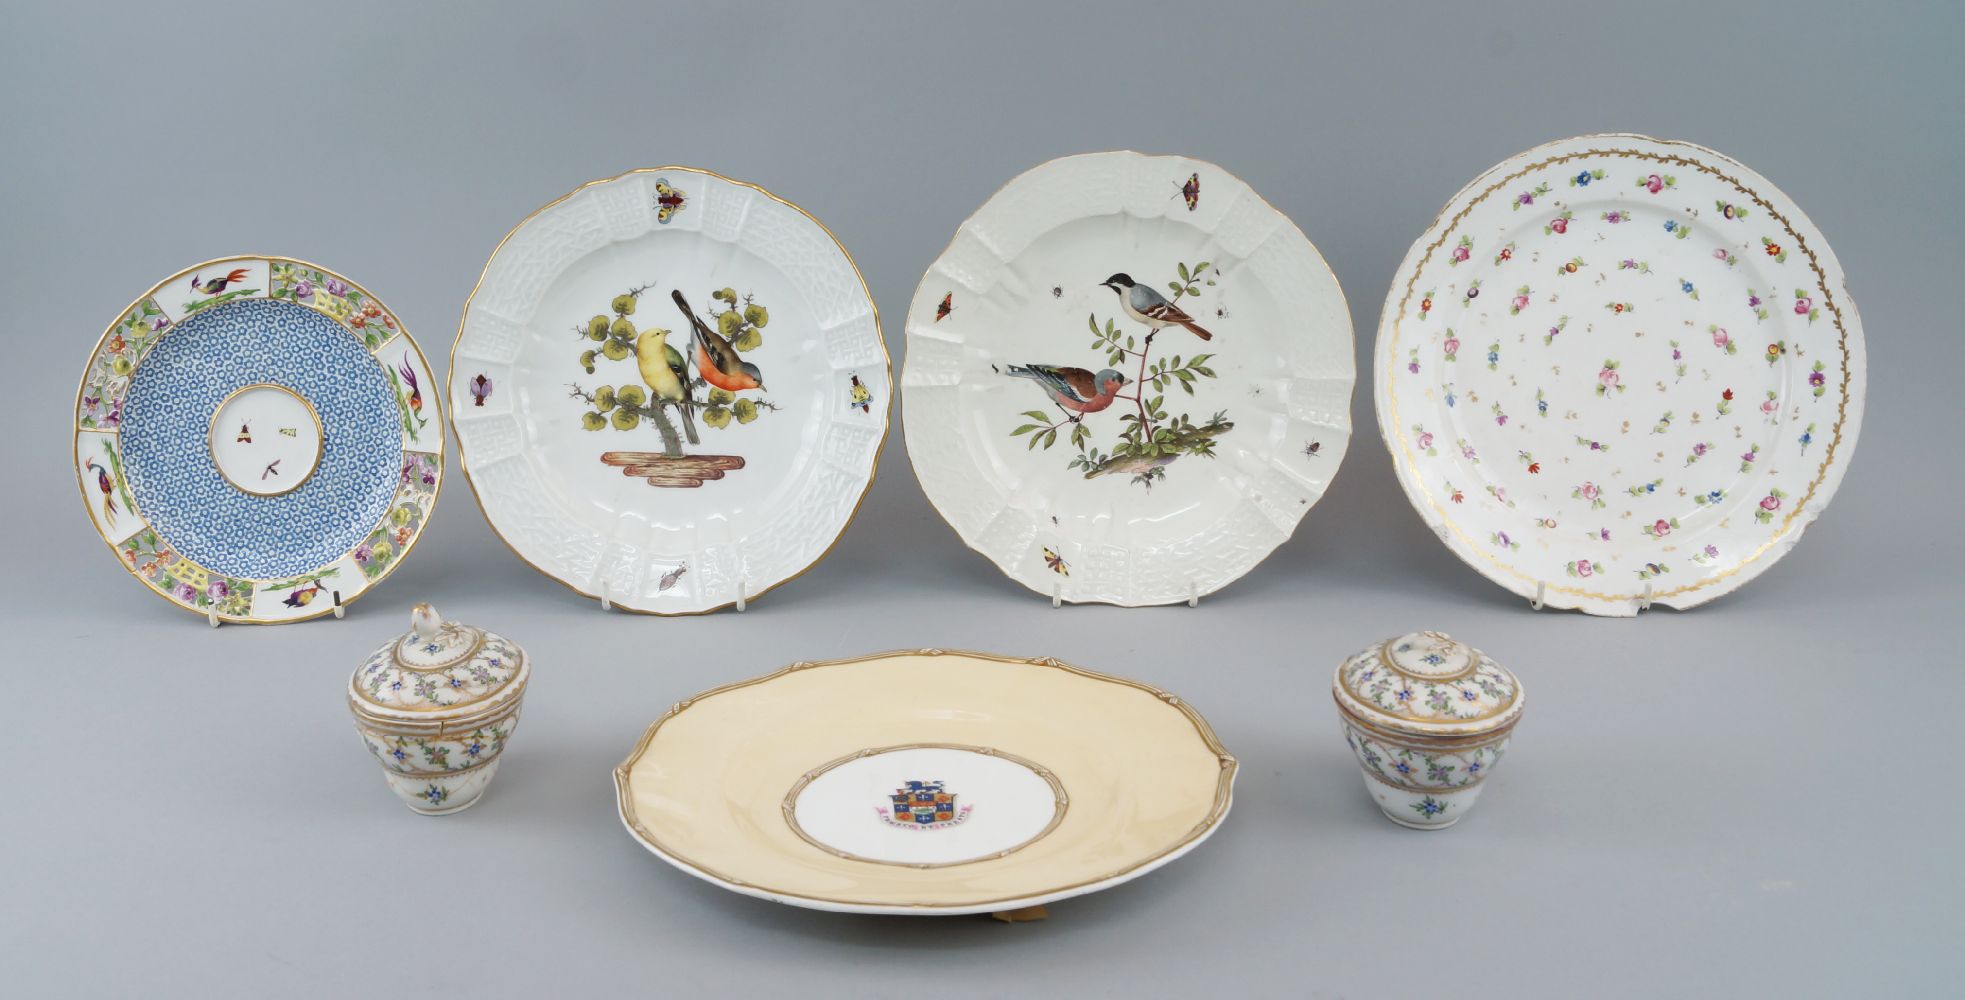 A Copeland and Garrett porcelain plate, 19th century, bearing the armorials of of Alderman Henry